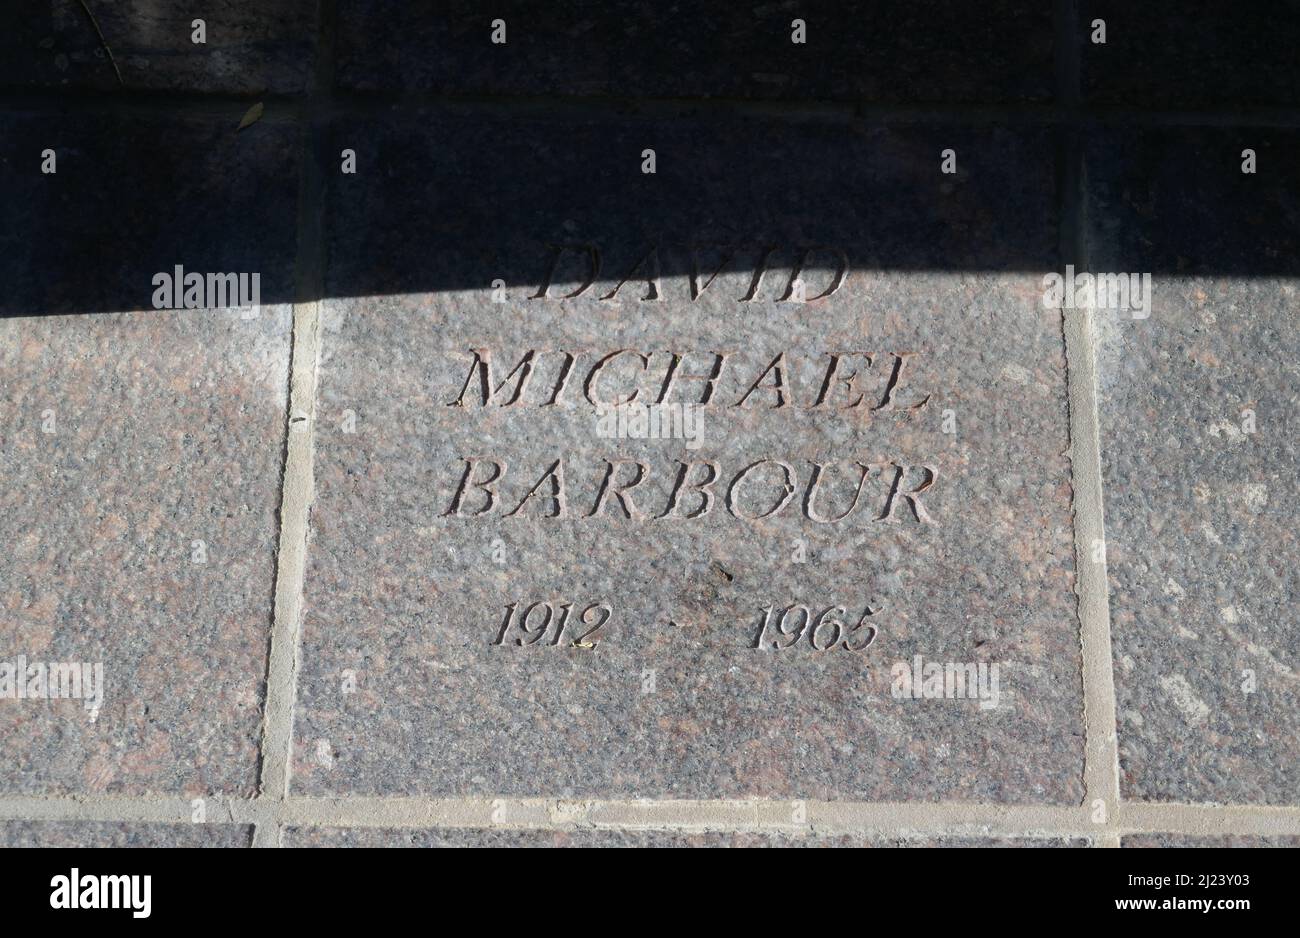 Los Angeles, California, USA 21st March 2022 A general view of atmosphere of David Michael Barbour's Grave at Pierce Brothers Westwood Village Memorial Park on March 21, 2022 in Los Angeles, California, USA. Photo by Barry King/Alamy Stock Photo Stock Photo